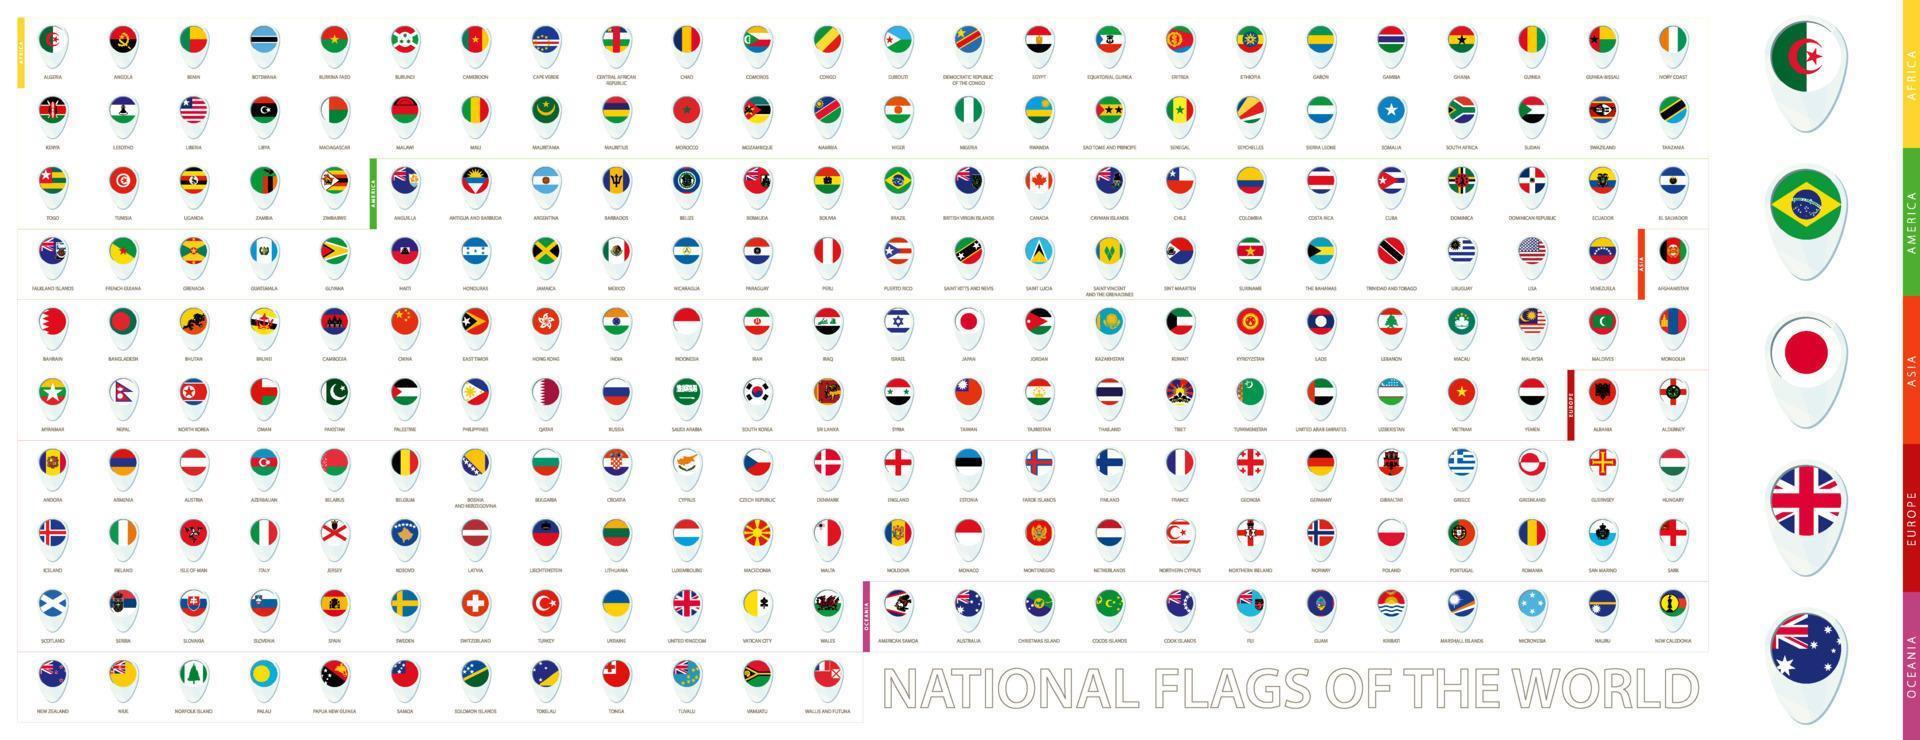 All national flags of the World sorted alphabetically by continent. Blue pin icon design. vector